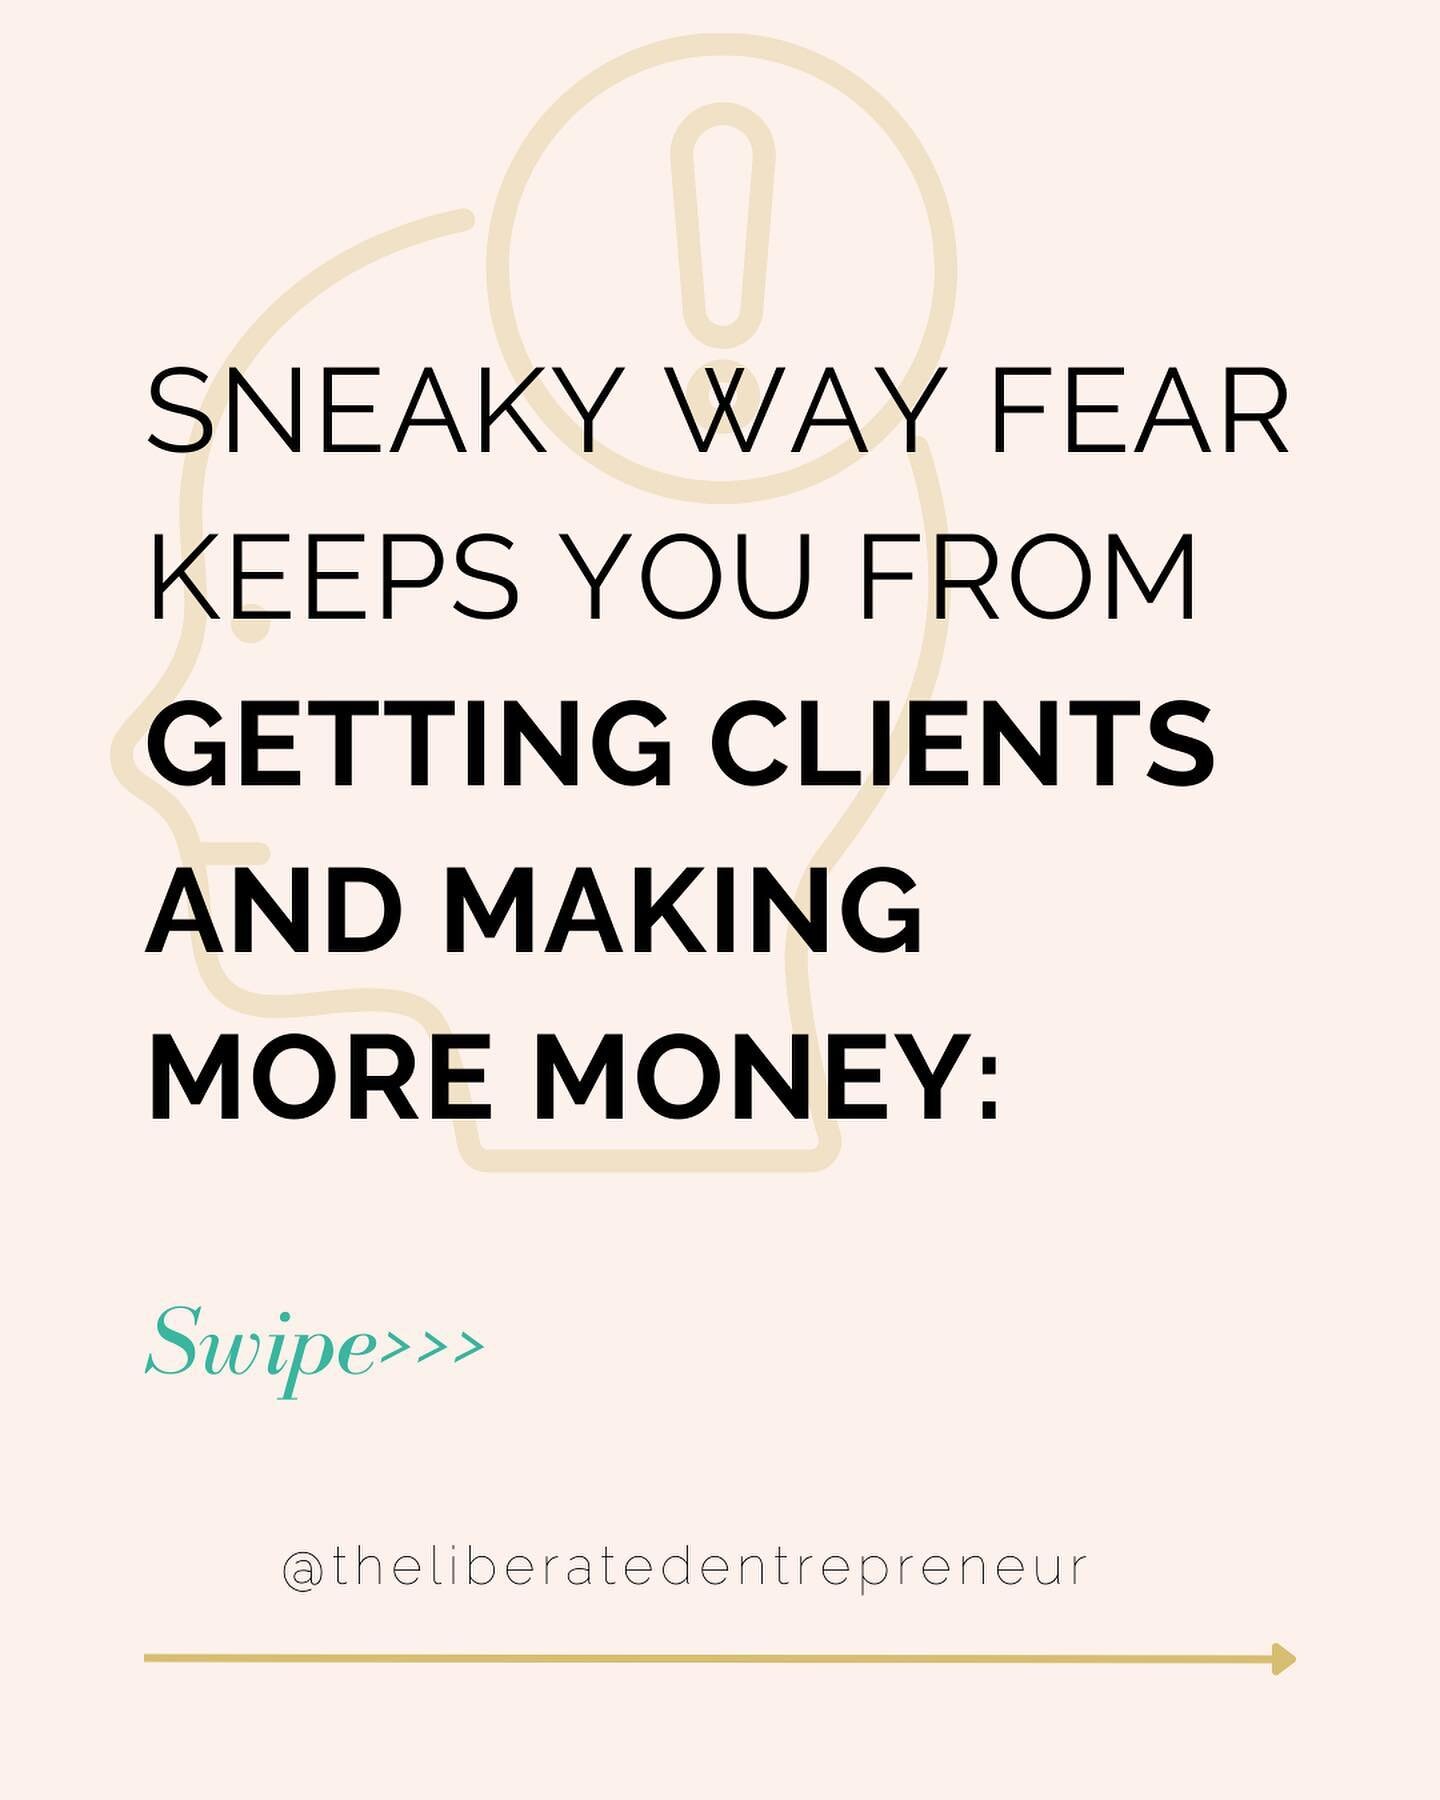 The amazing clients you want to work with are on the other side of fear. ⚡️
 It takes both outer and INNER WORK to get what you want.💕

Do you agree? I&rsquo;d love to hear below ⬇️

.
.
.
.
.
.
.
#servicebasedentrepreneur #coachingcommunity #selfho